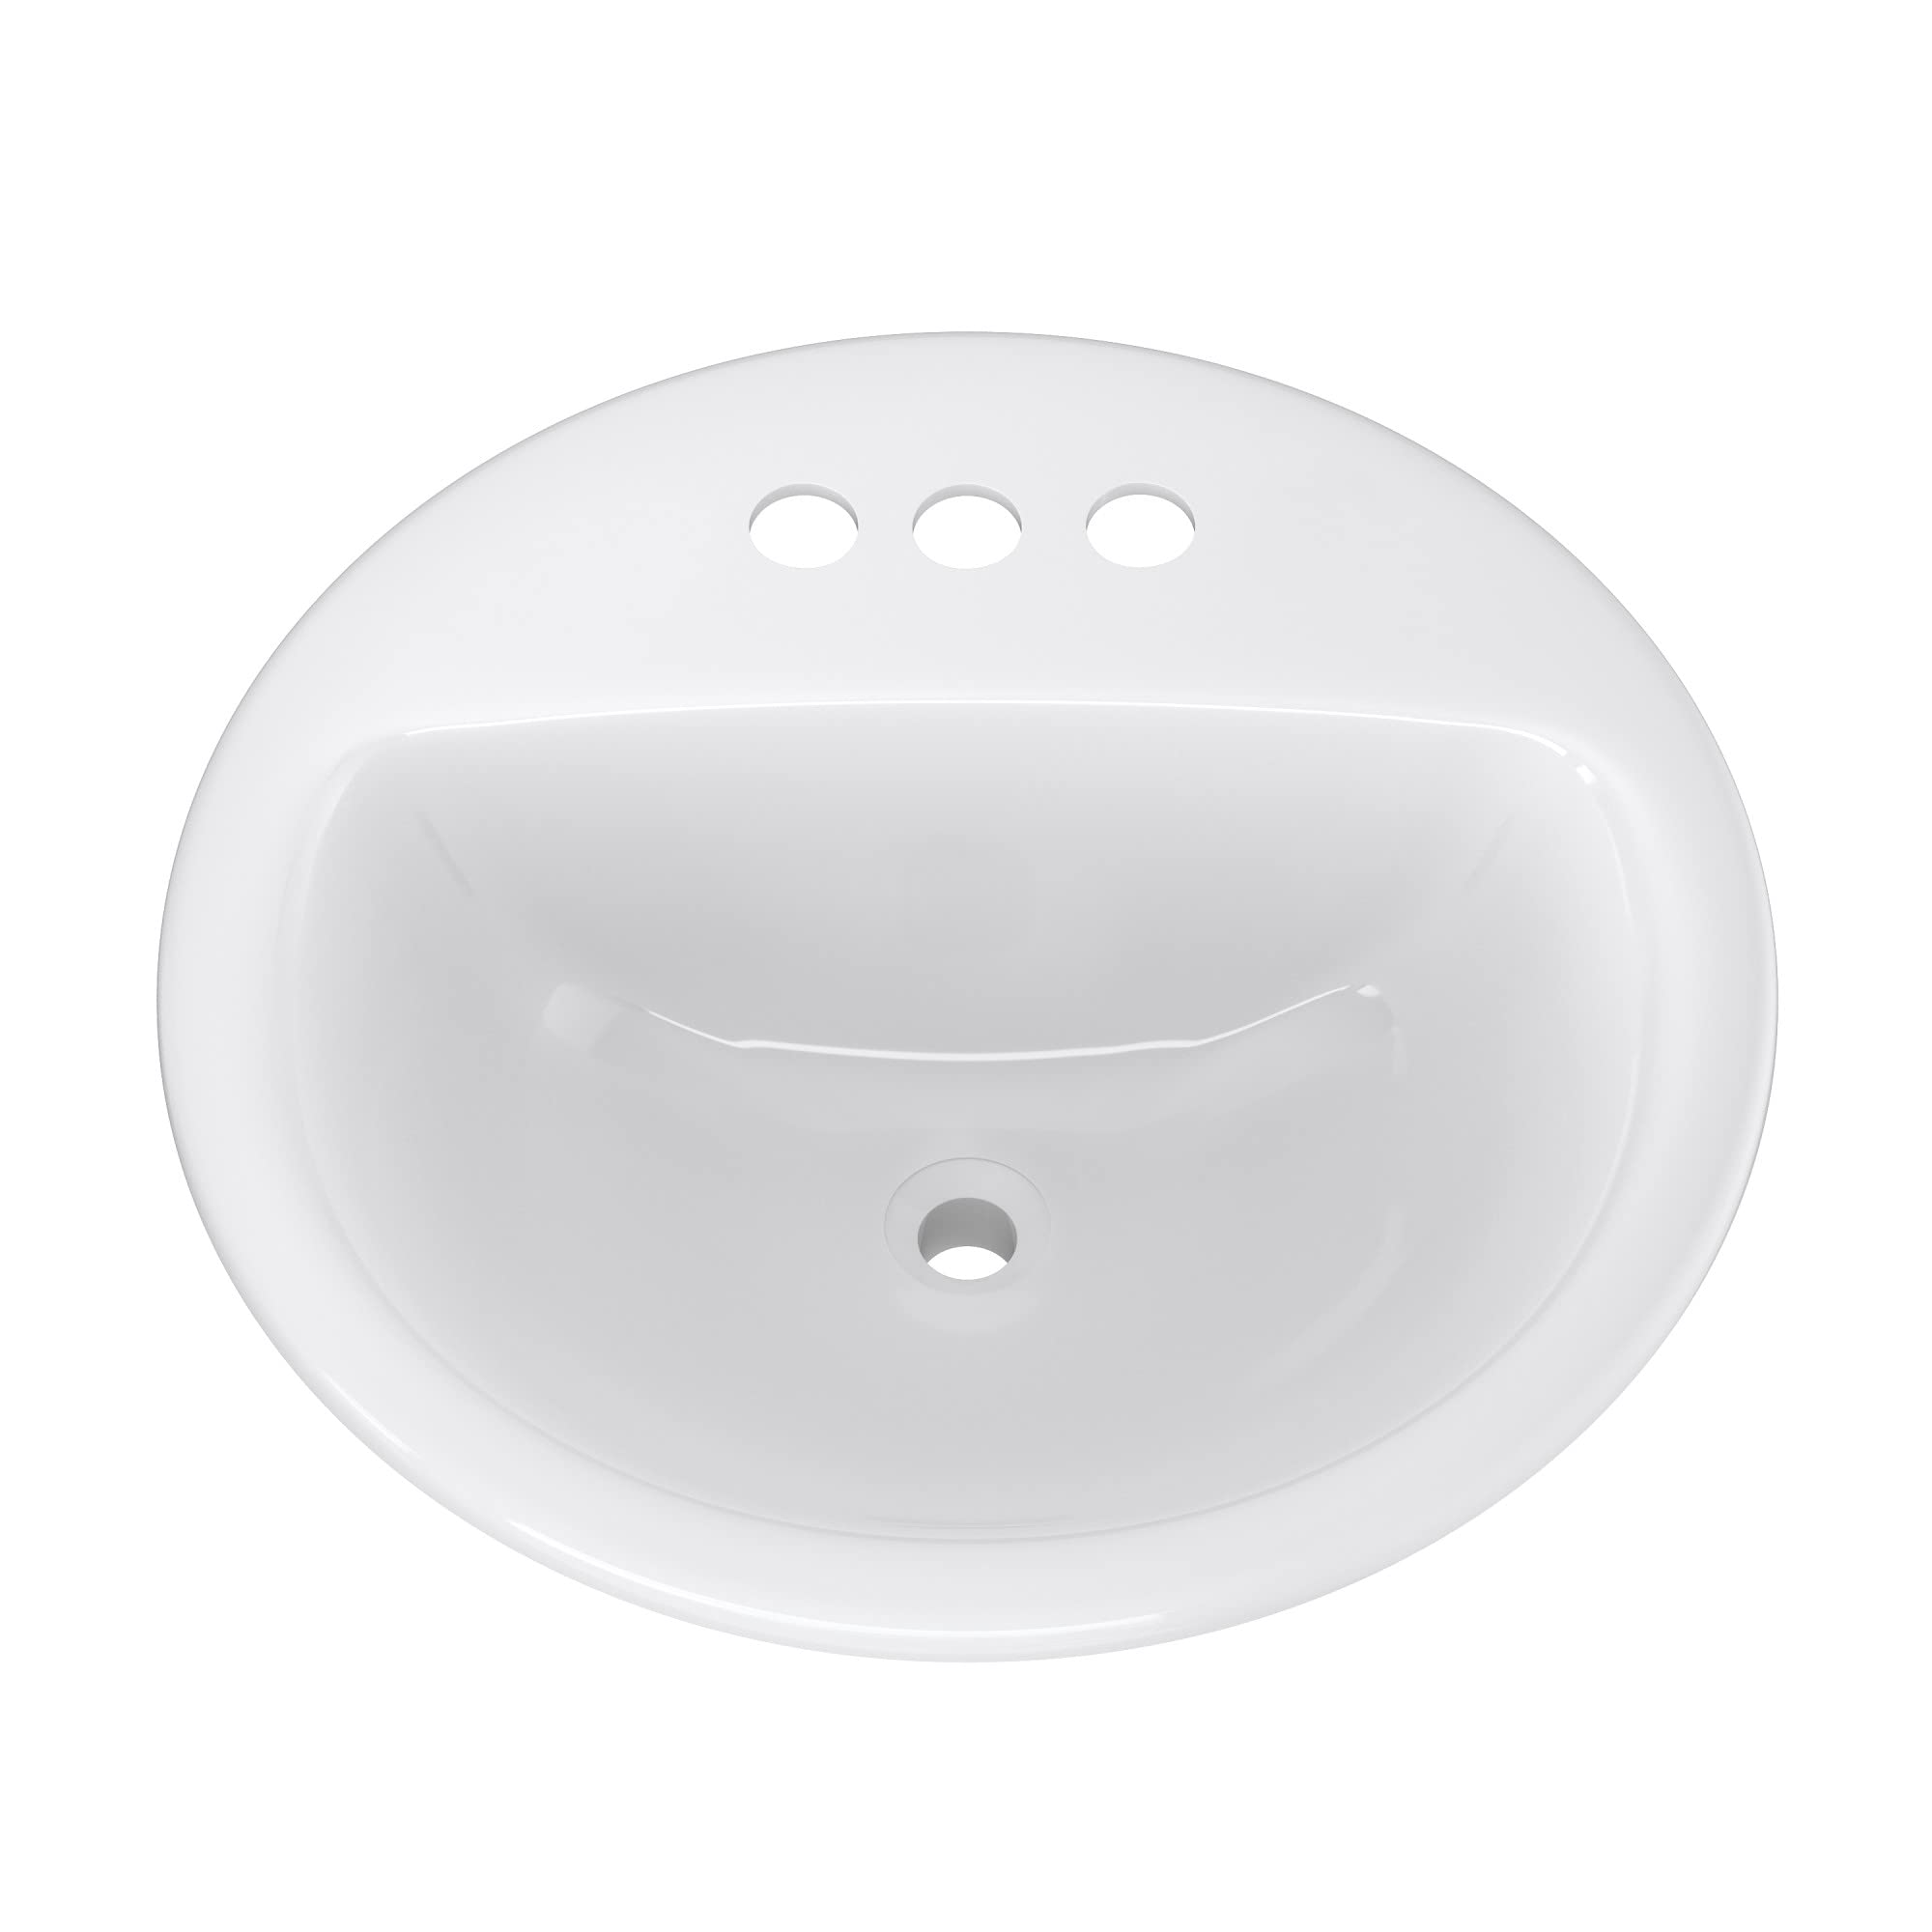 PROFLO PF194R Rockaway 19" Circular Vitreous China Drop In Bathroom Sink with Overflow and 3 Faucet Holes at 4" Centers